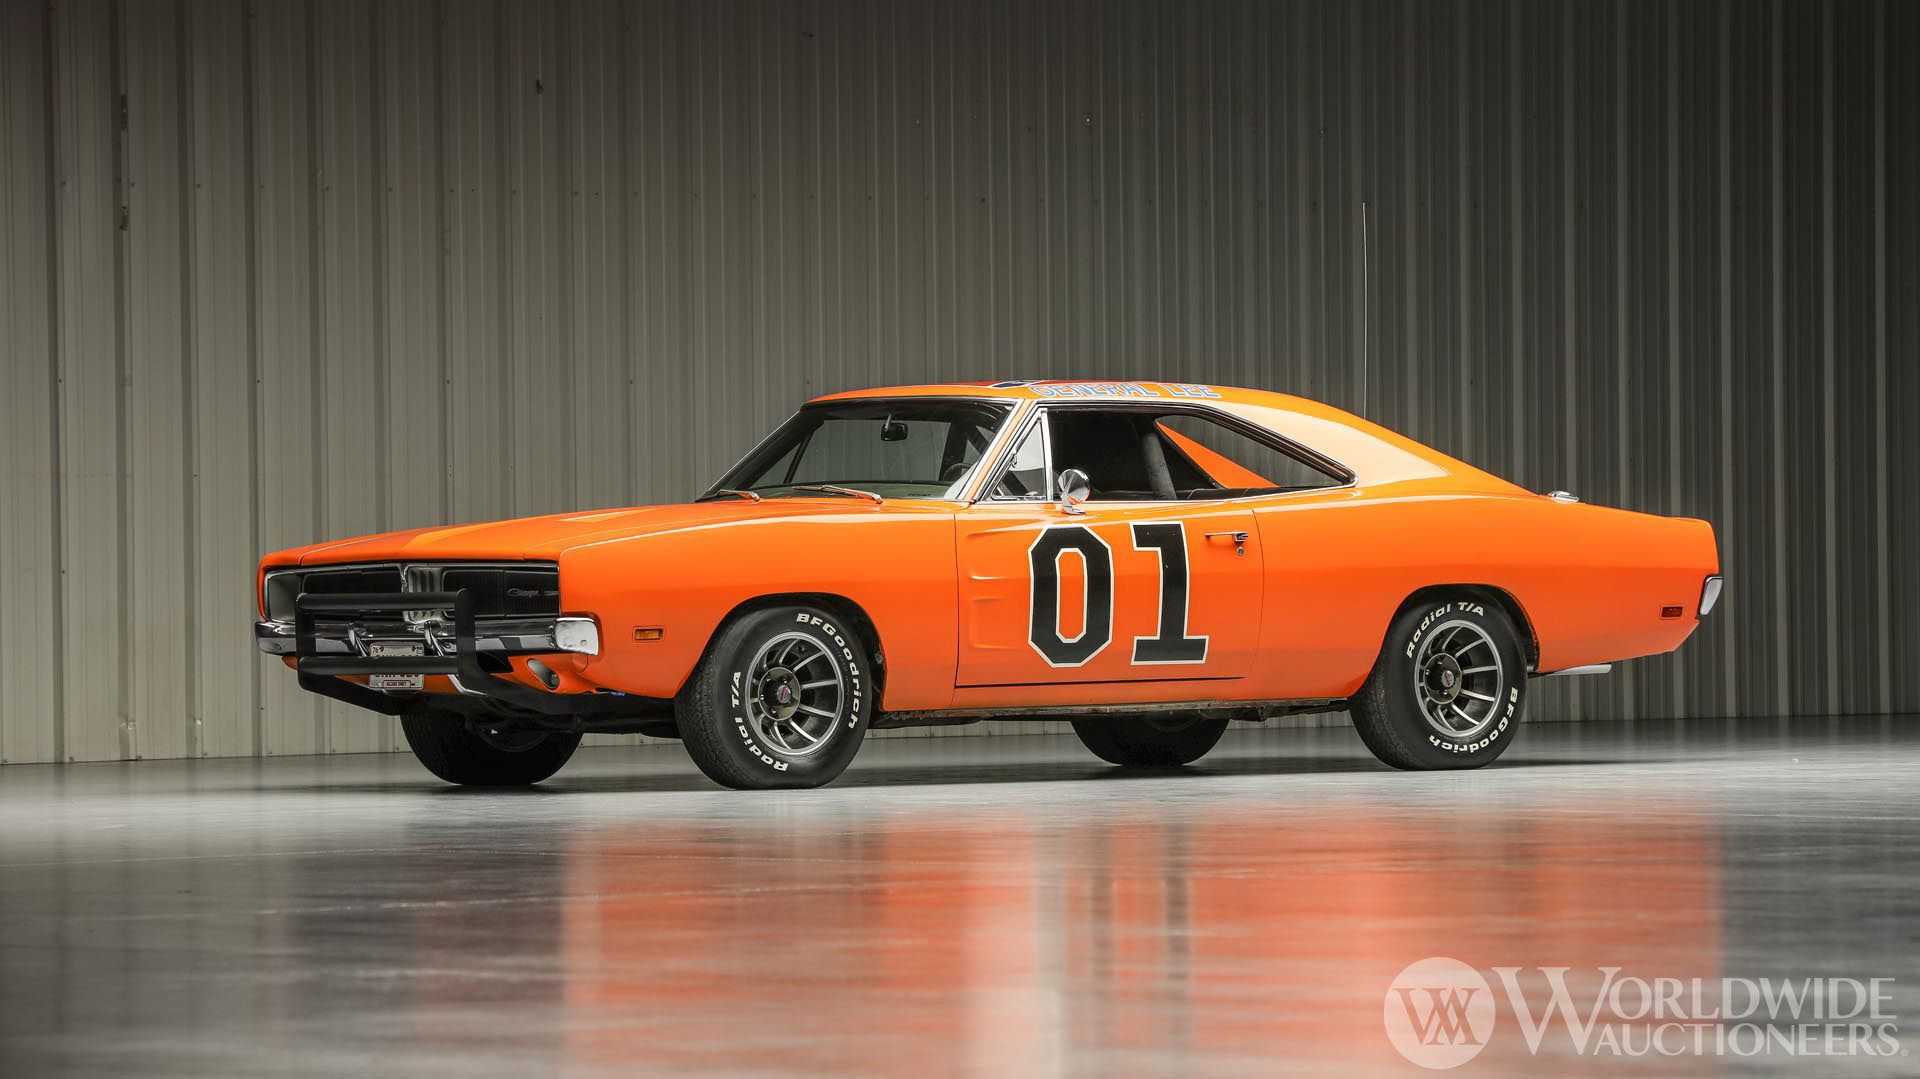 Jump On This Real Deal General Lee 1969 Dodge Charger